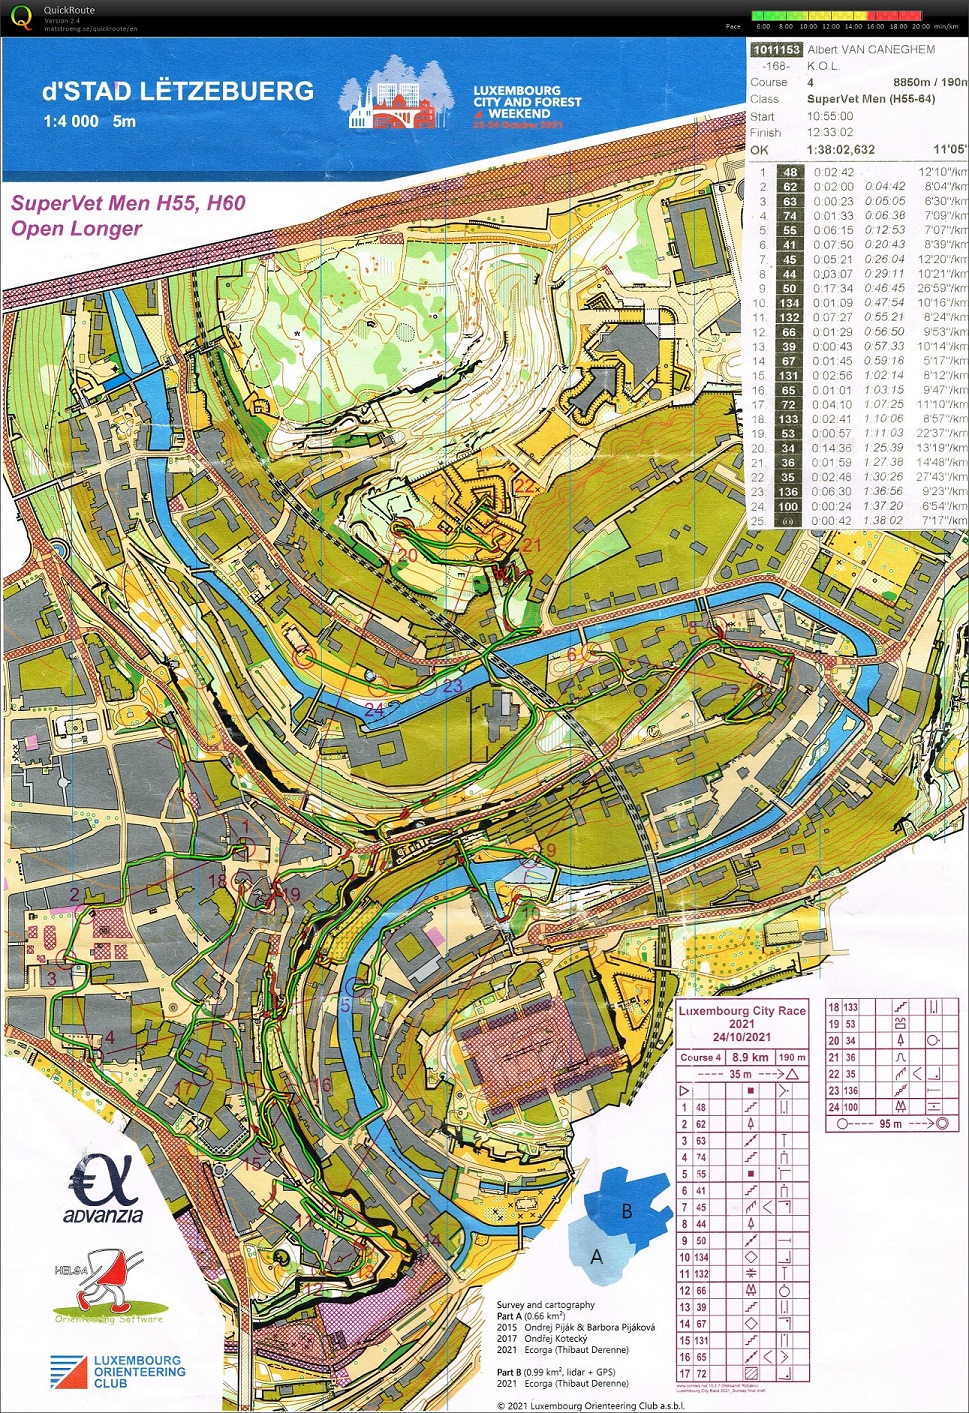 Luxembourg City Race (24/10/2021)